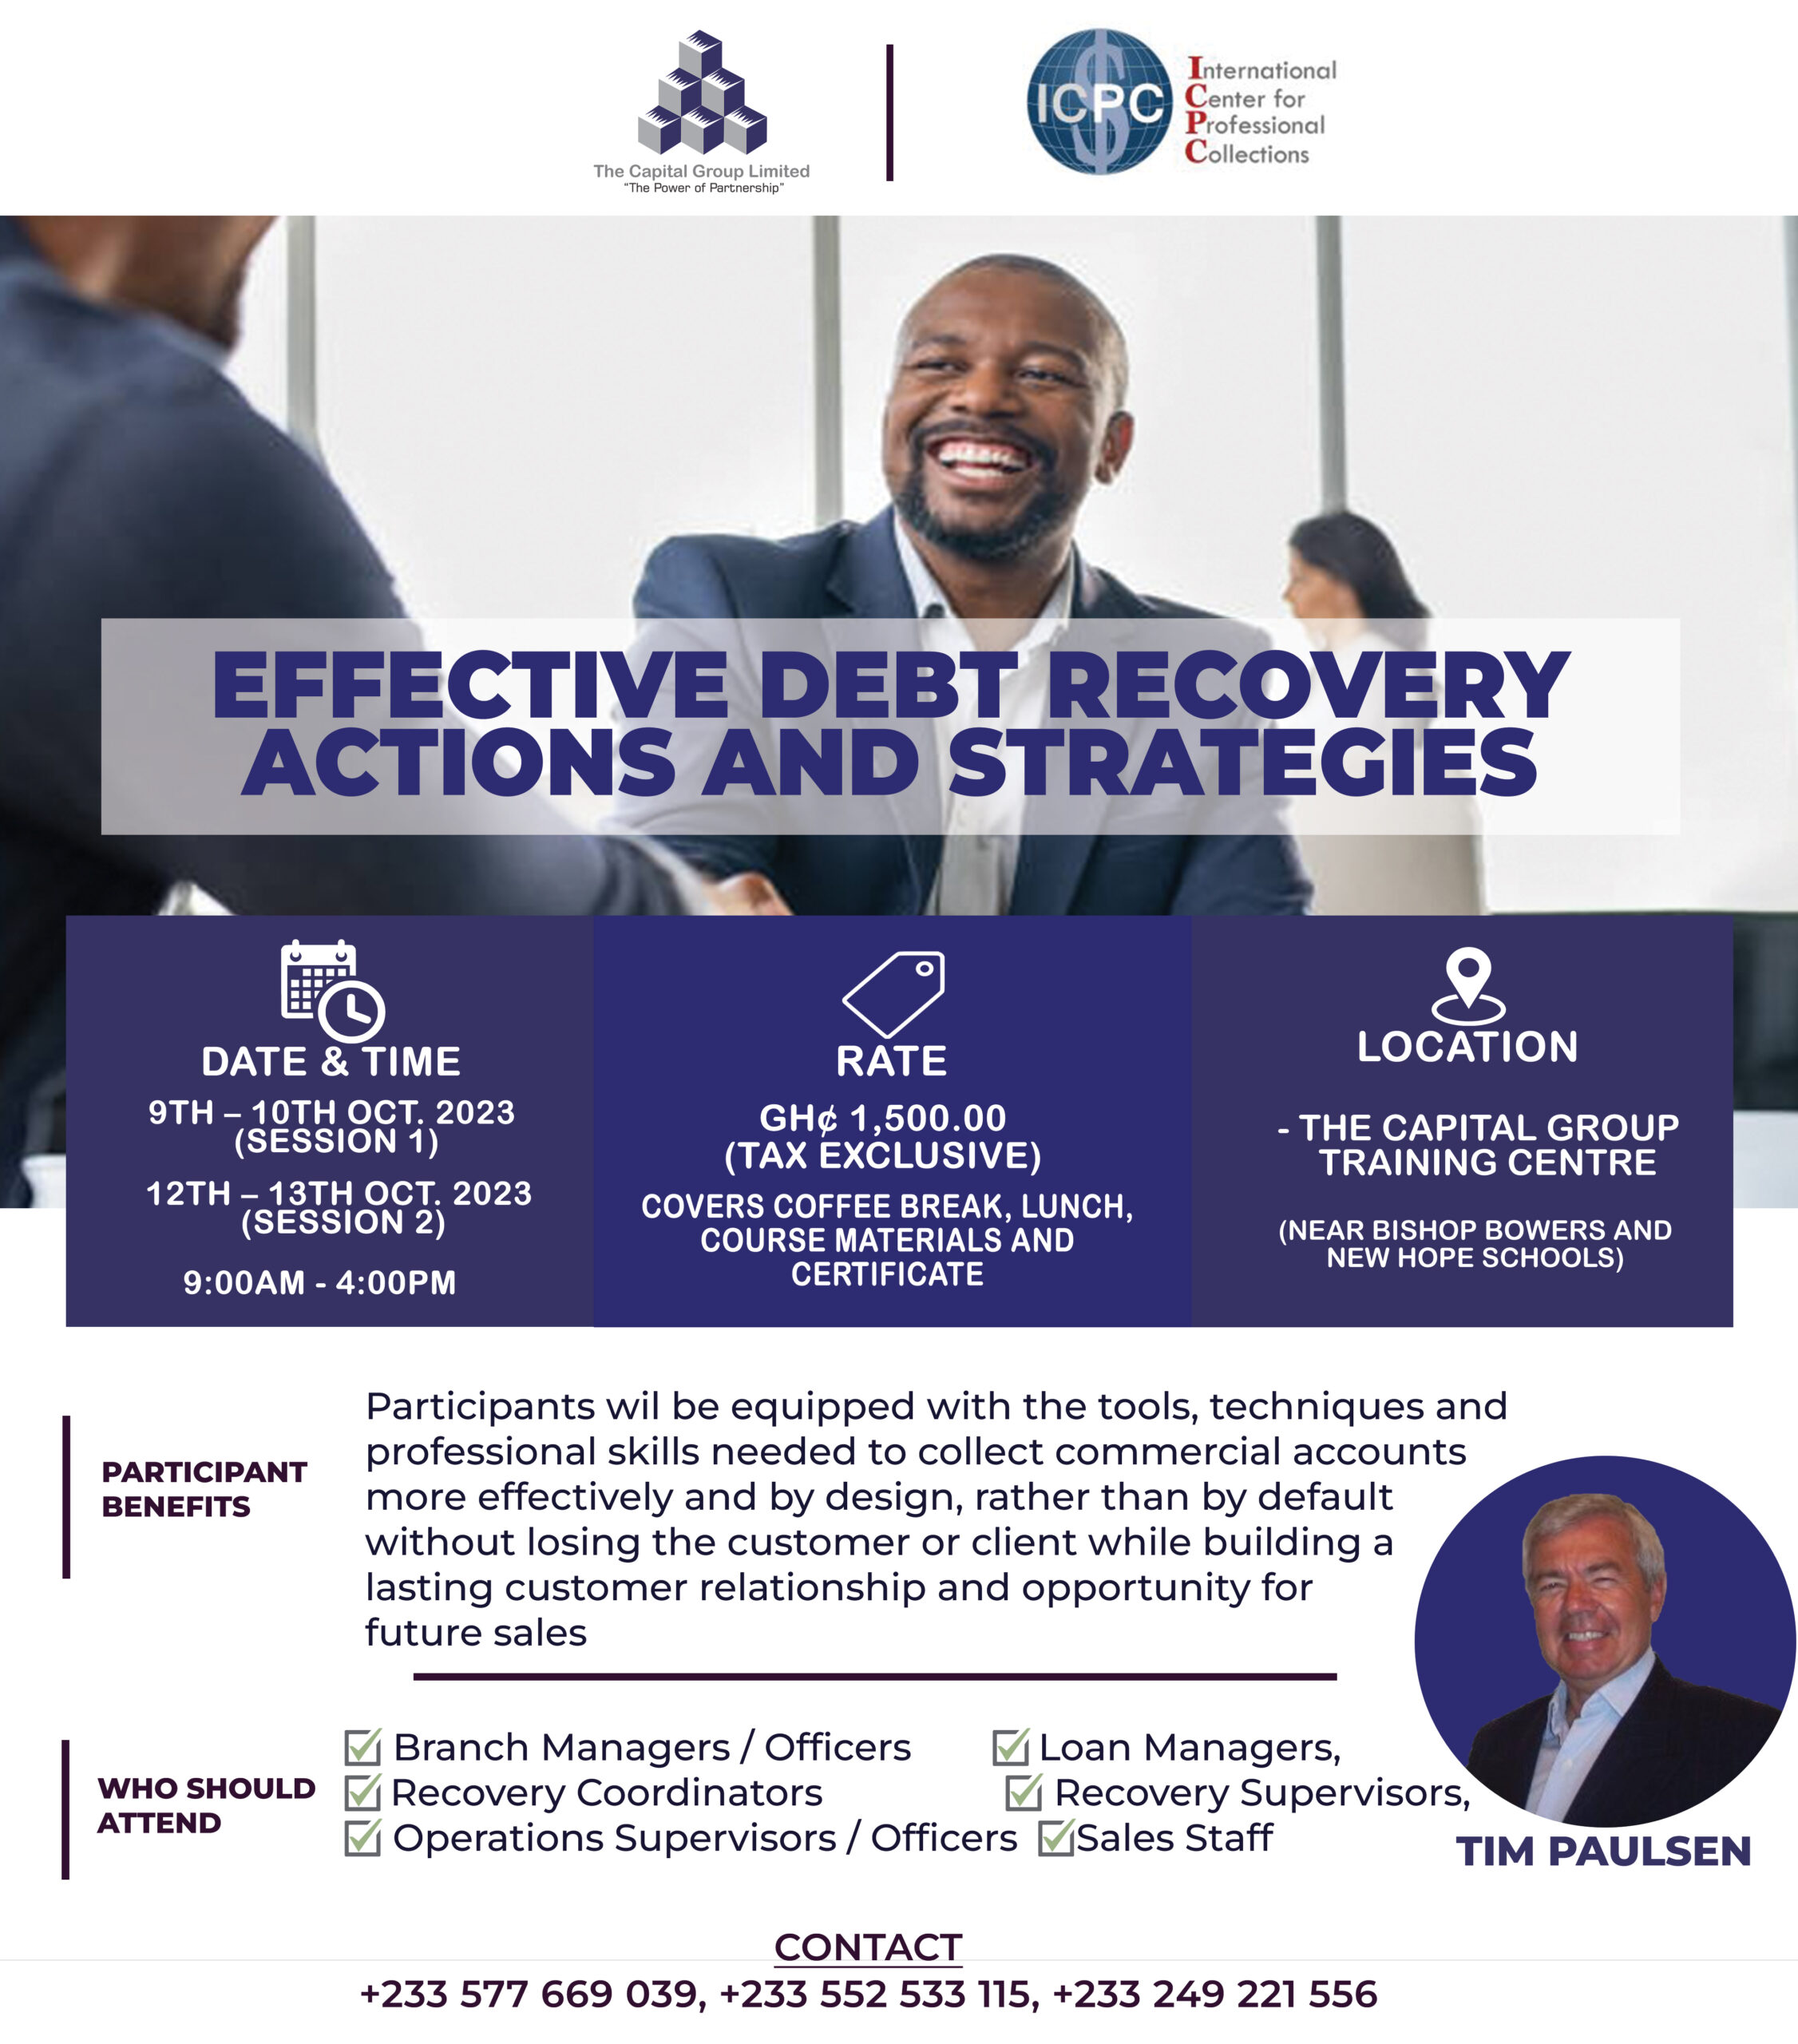 EFFECTIVE DEBT RECOVERY ACTIONS AND STRATEGIES MASTERCLASS